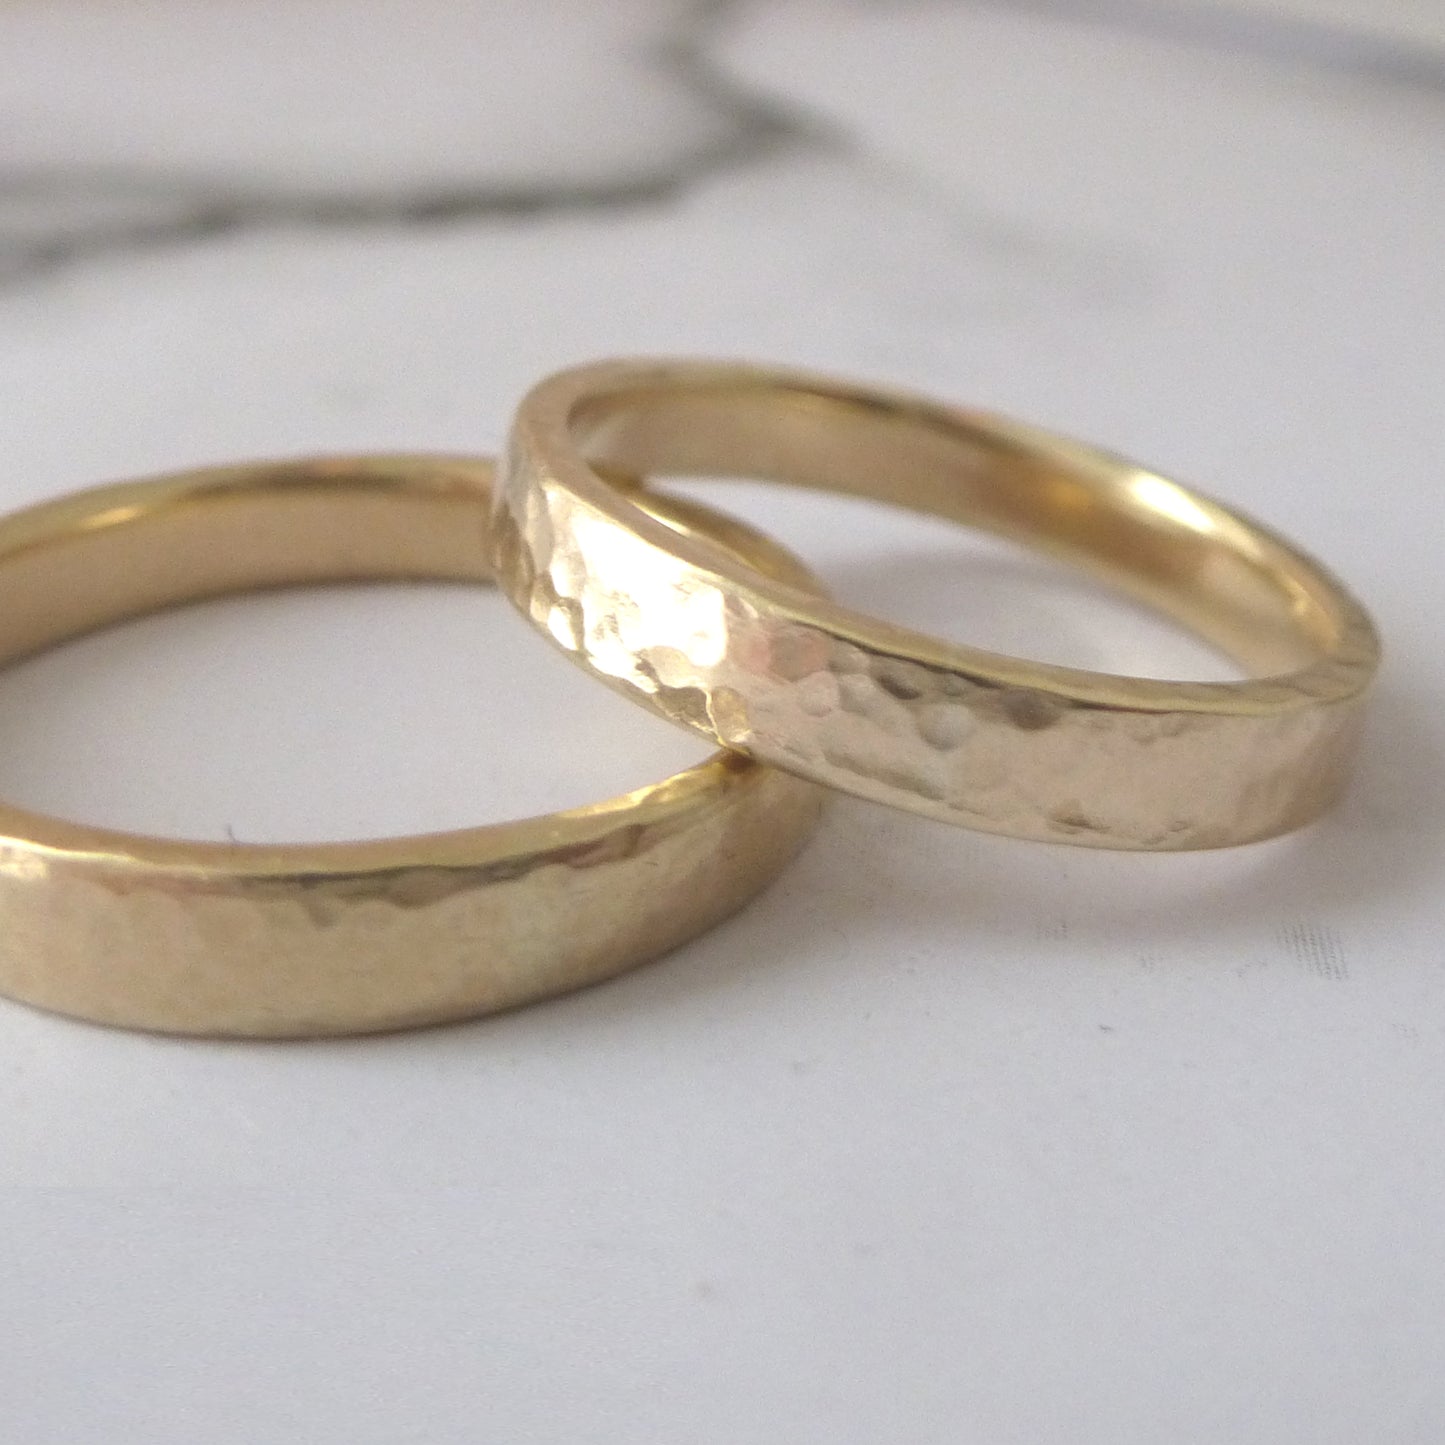 Two stacked bands in recycled 9ct yellow gold, one hammered finish, 3mm with square edges, one 4mm with soft edges